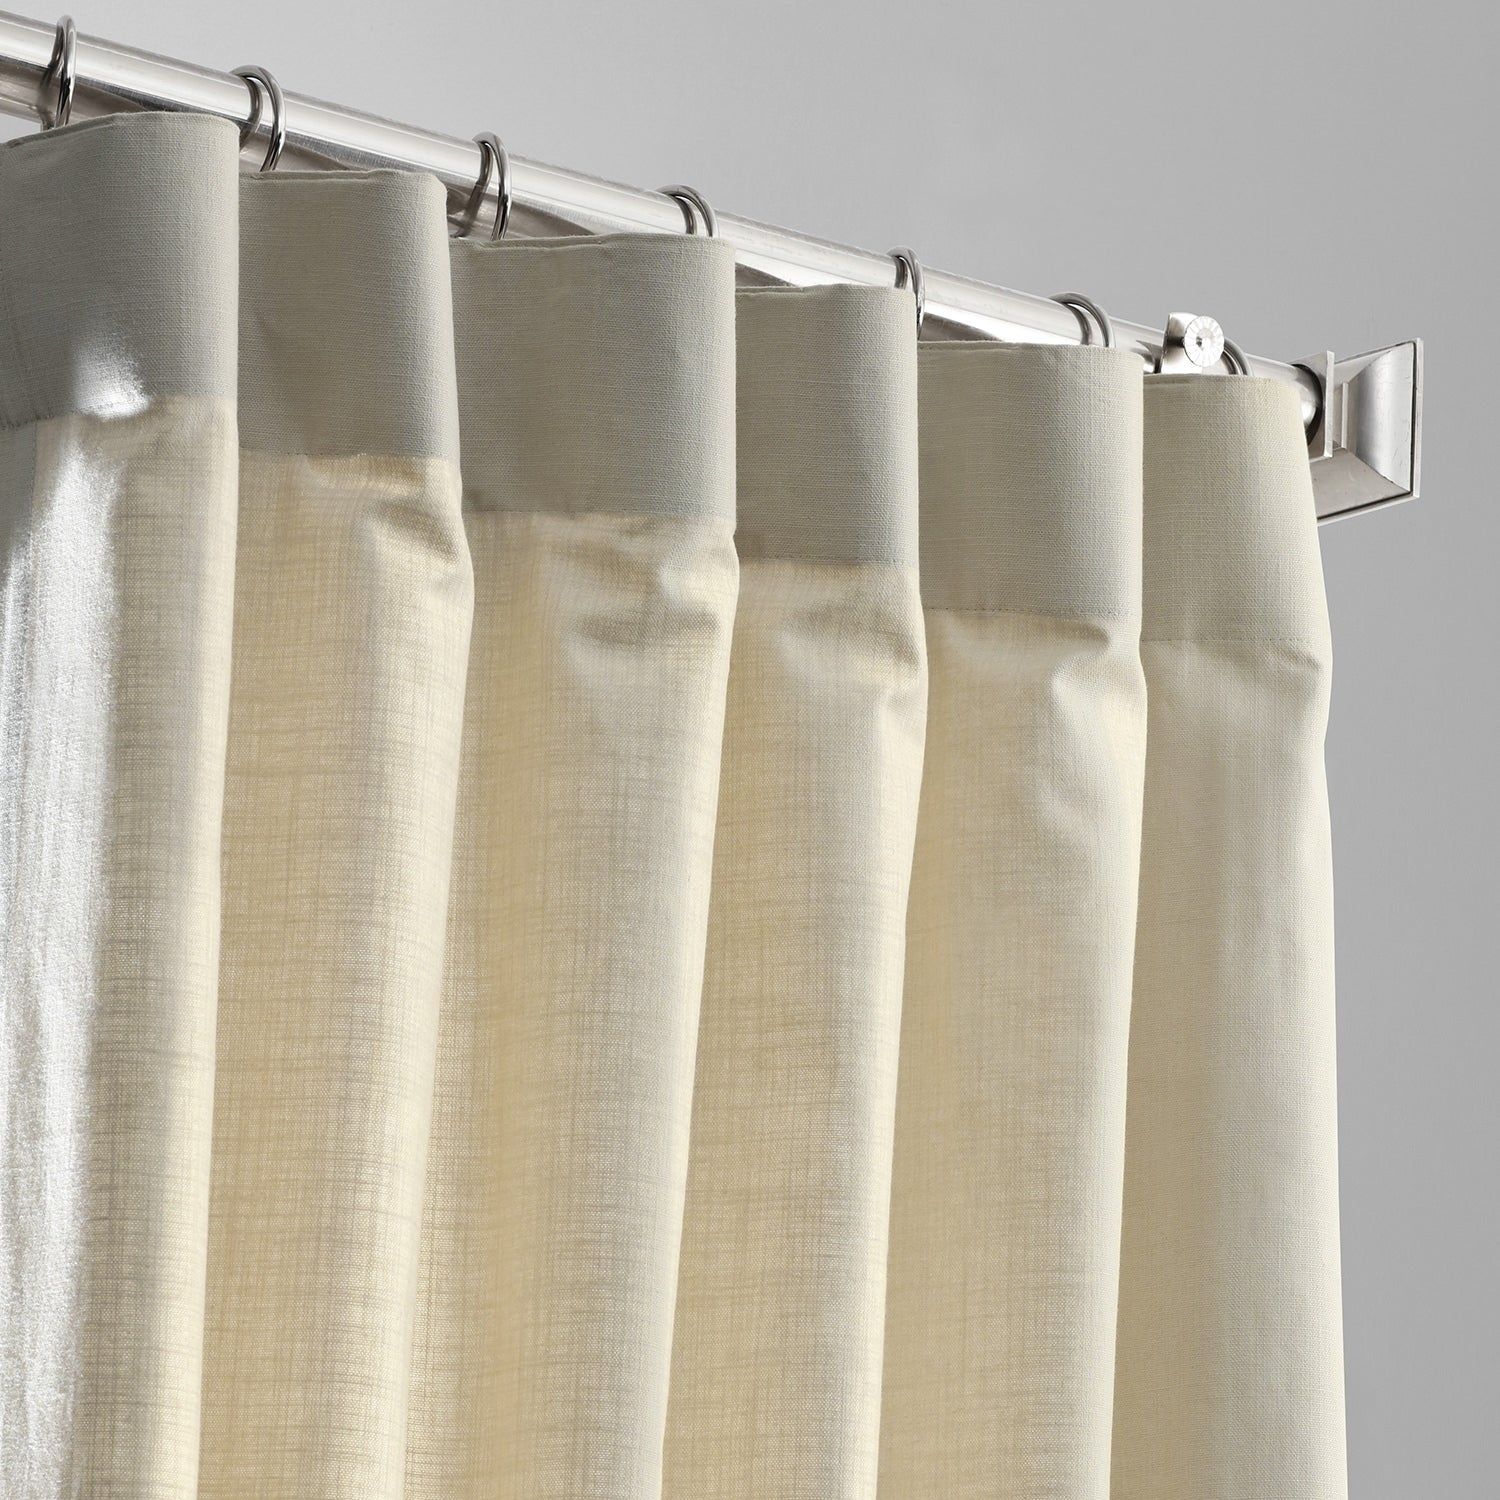 Exclusive Fabrics Solid Country Cotton Linen Weave Curtain Panel Intended For Solid Country Cotton Linen Weave Curtain Panels (Photo 26 of 30)